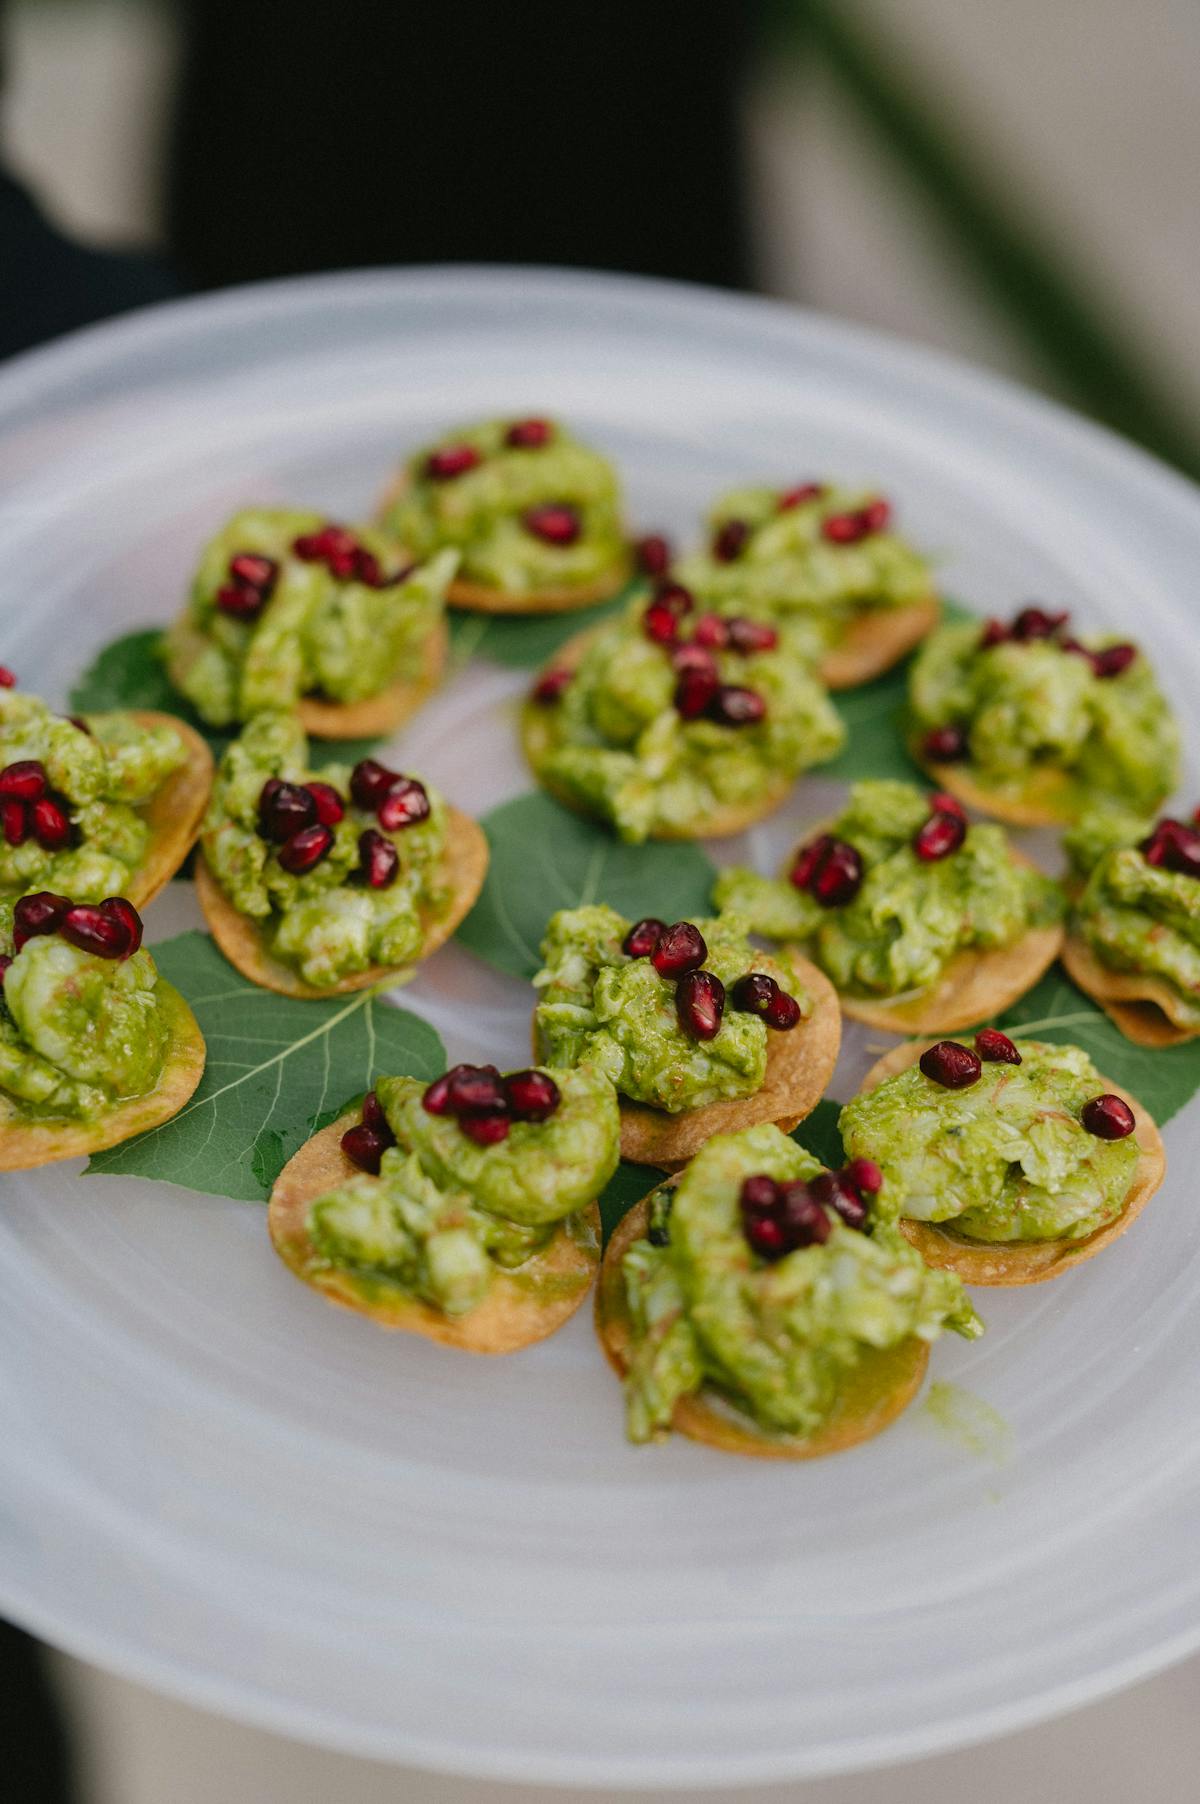 A tray of appetizers being passed at an event.